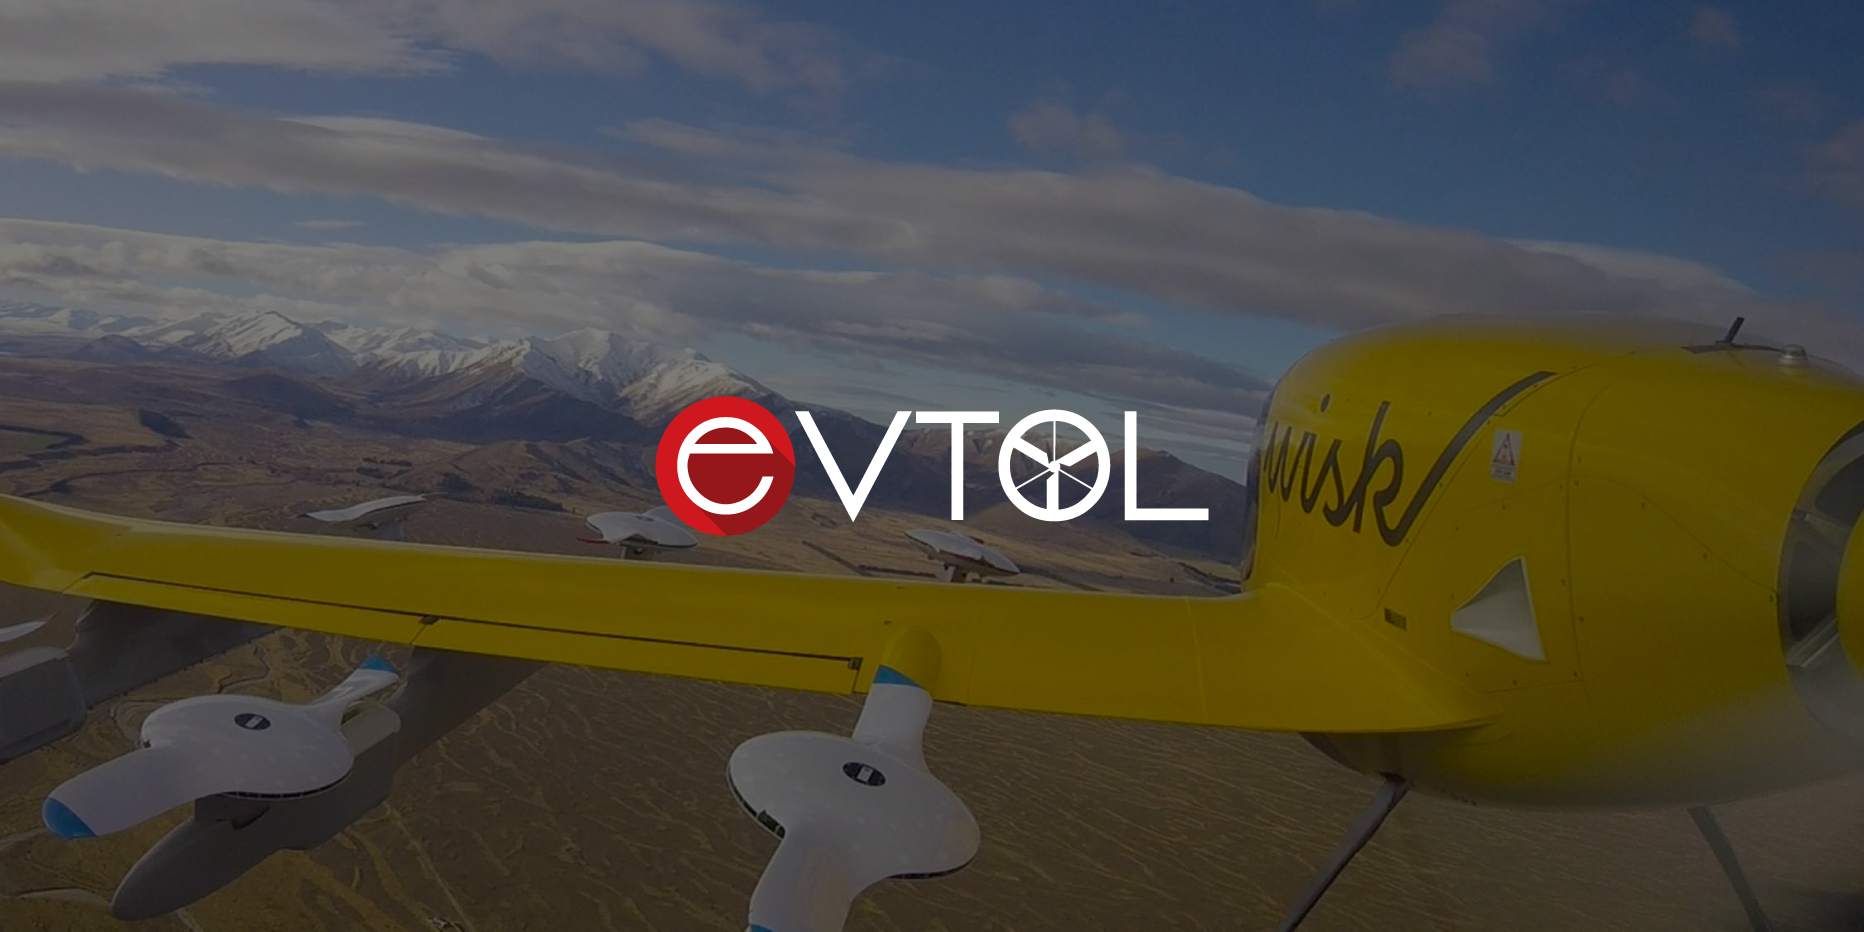 Boeing subsidiary Insitu to join Wisk’s autonomous air taxi passenger trials in New Zealand